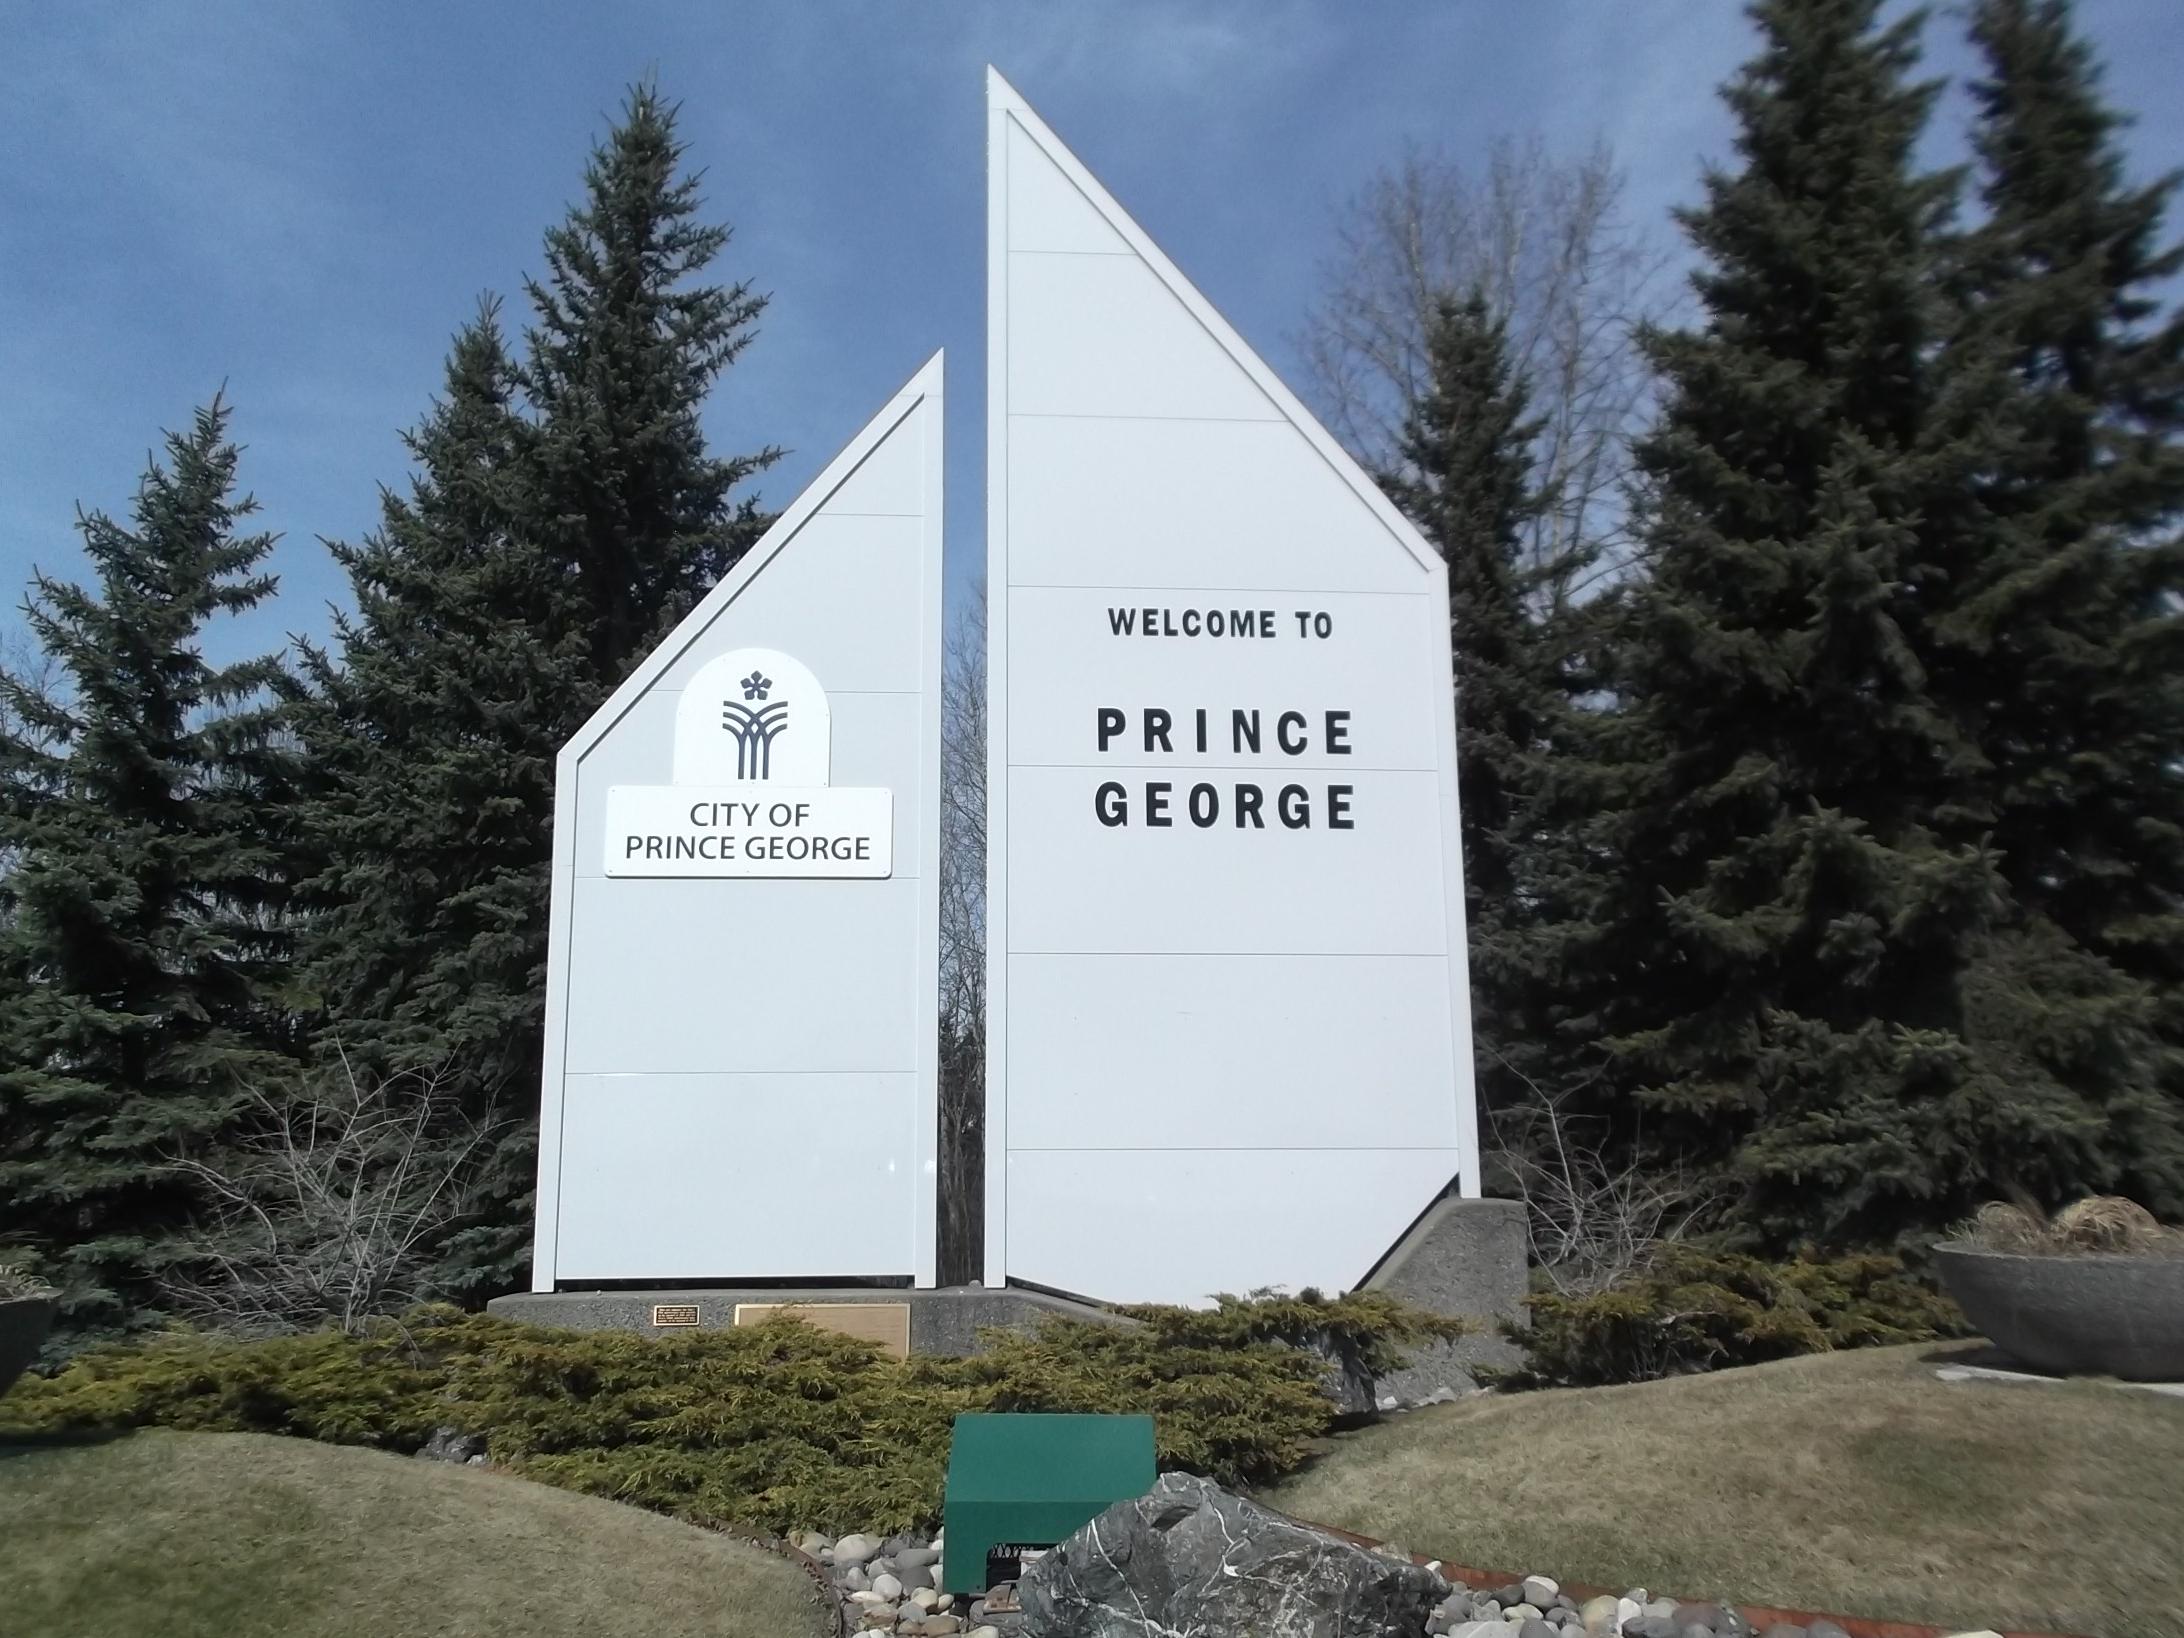 "Welcome to Prince George" sign